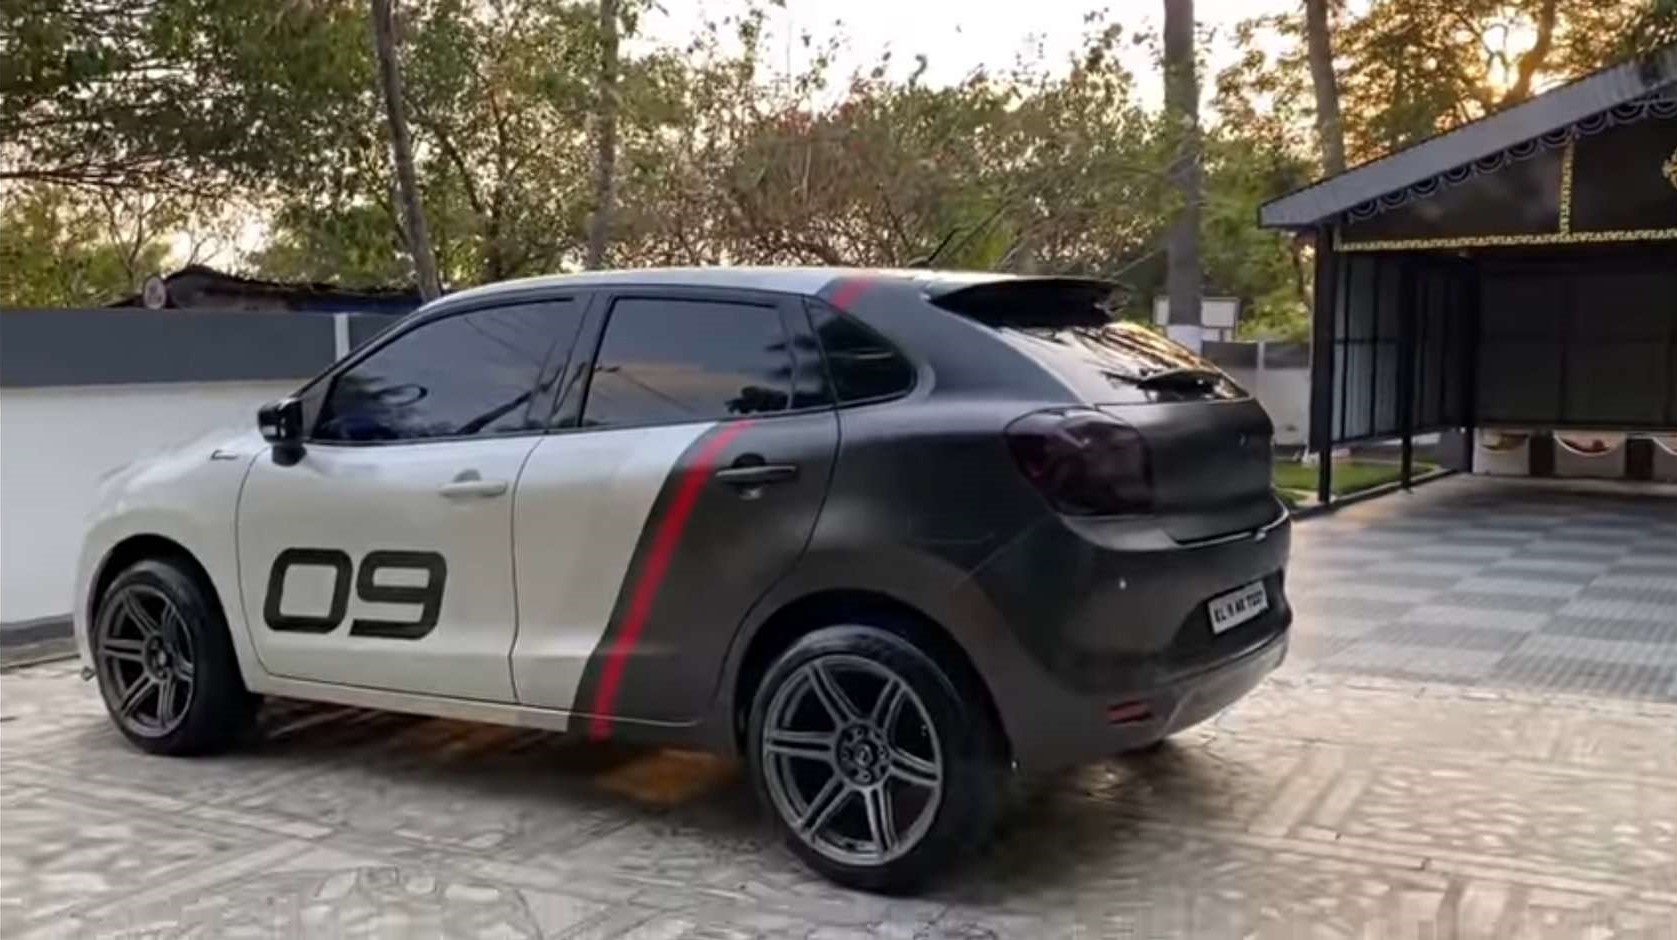 This modified Maruti Baleno has one of the coolest wraps we've seen so